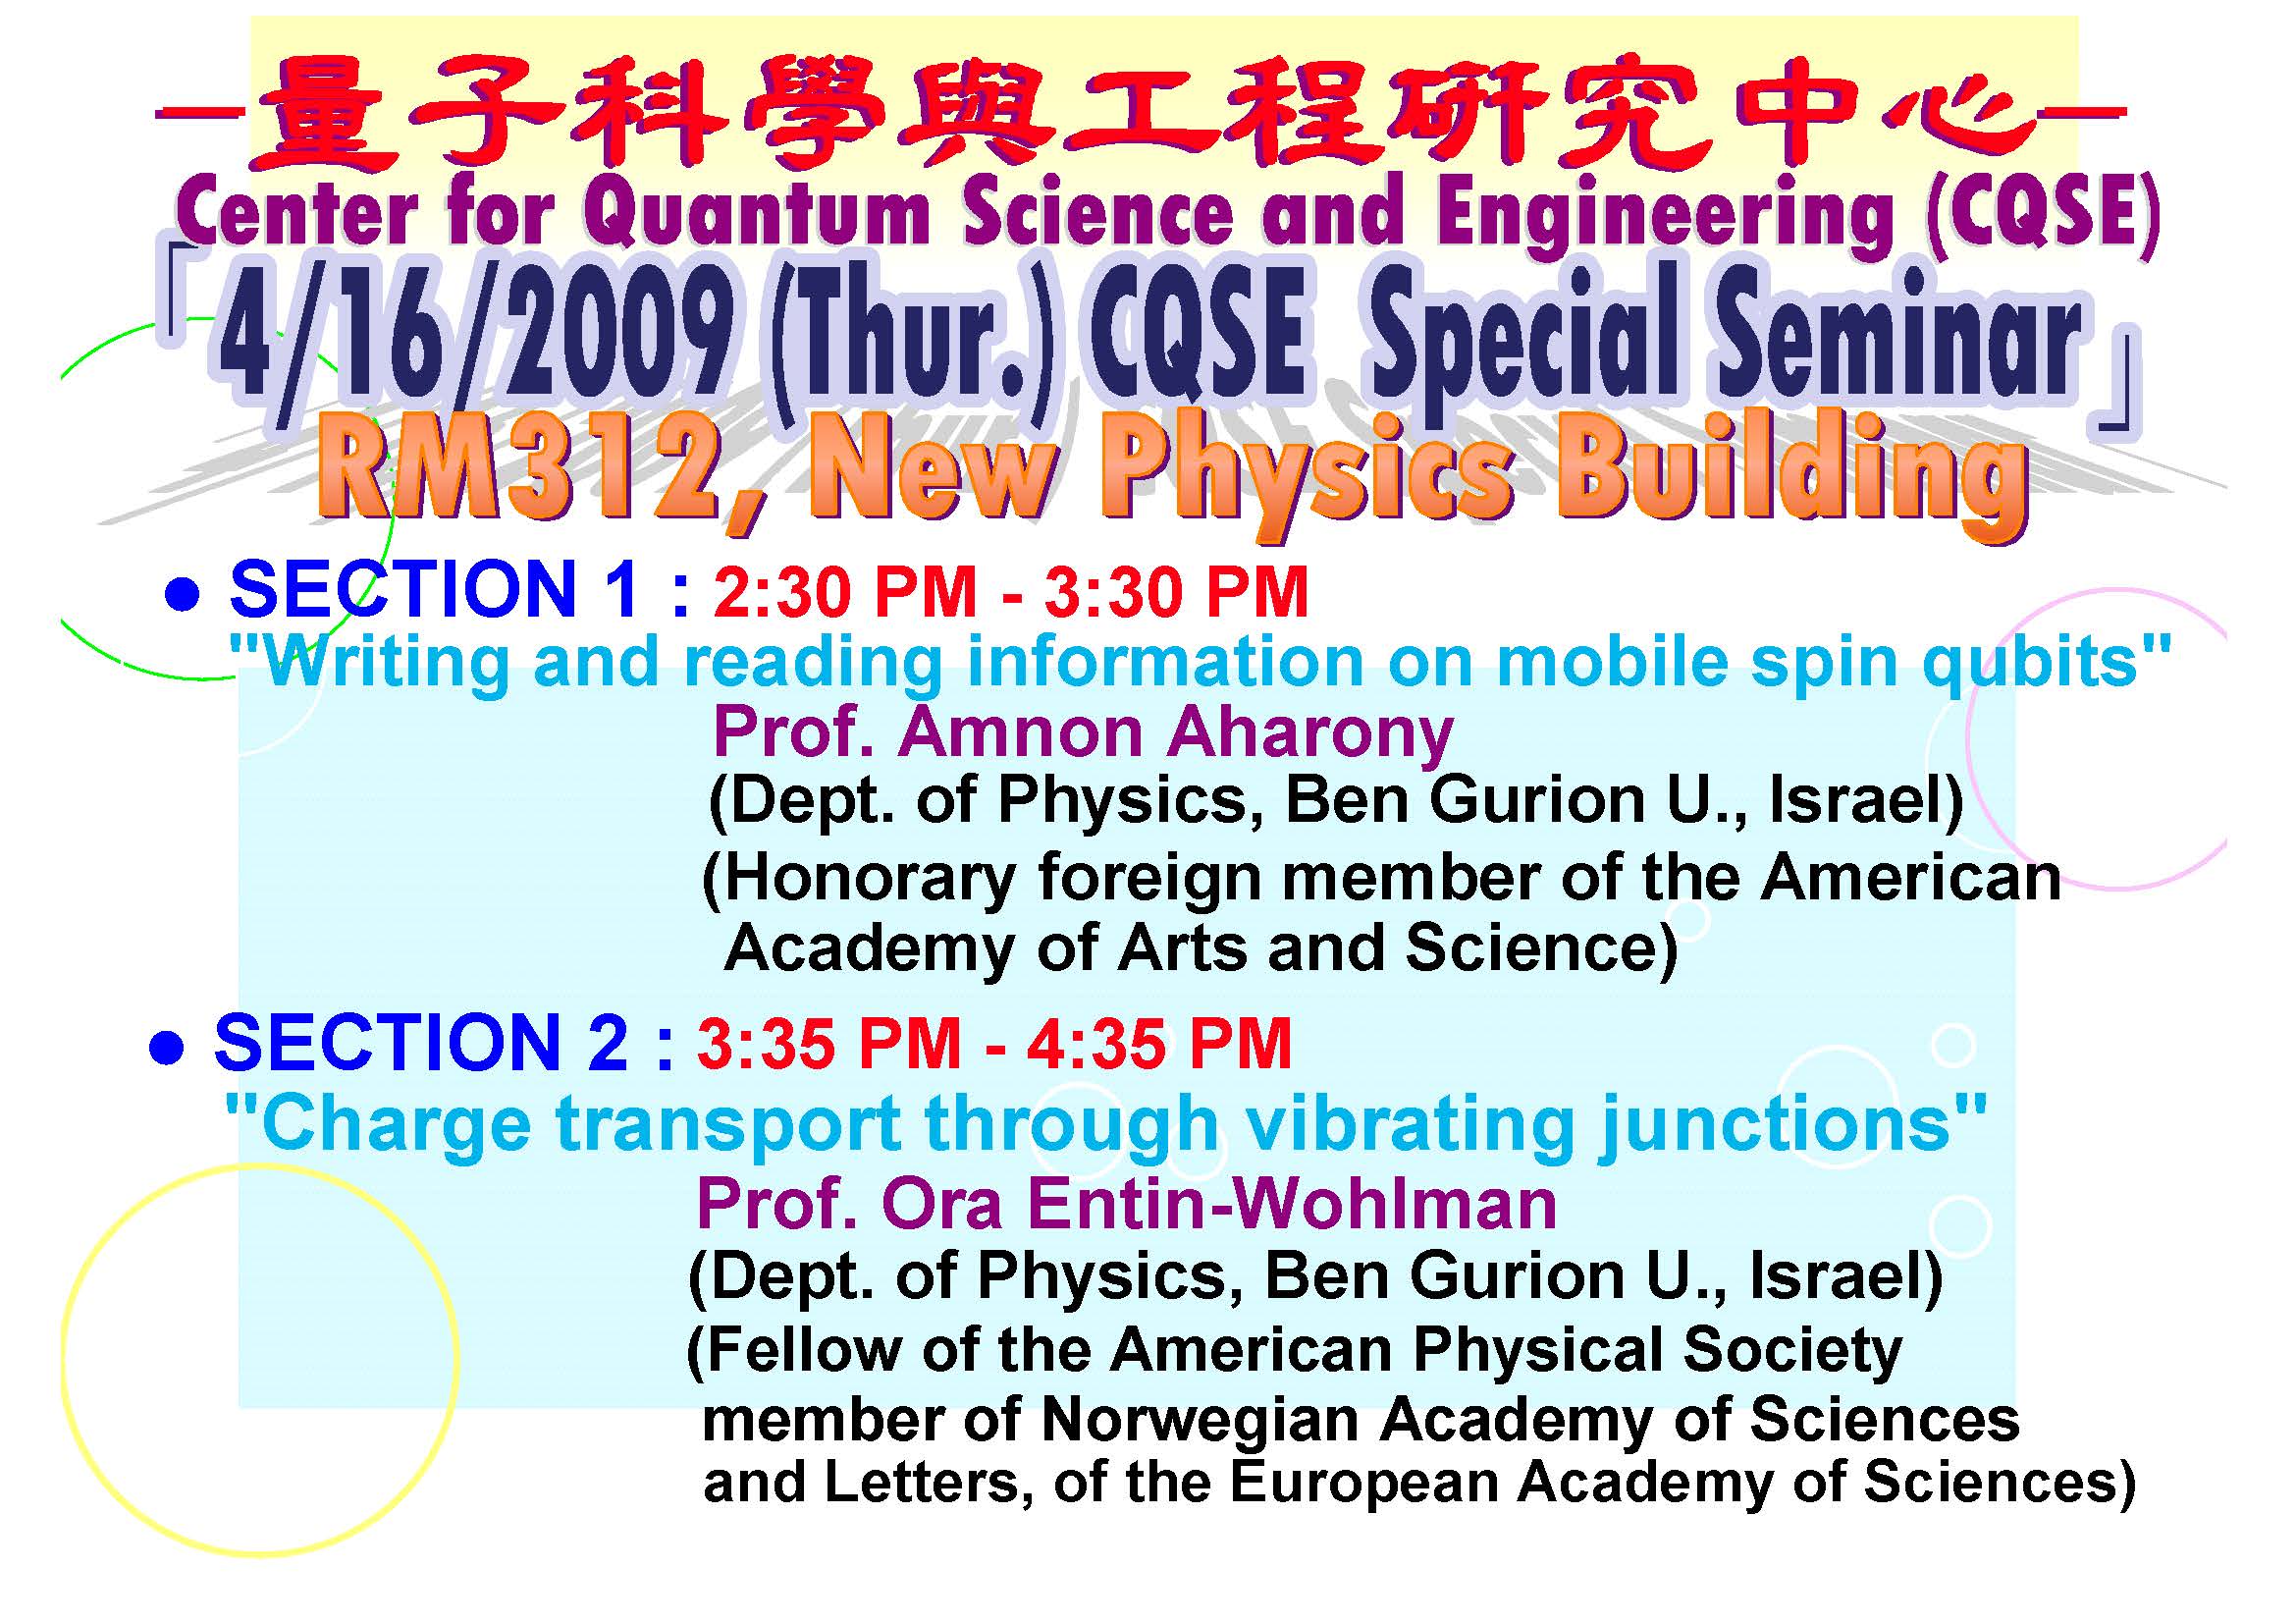 Special Seminar of Center for Quantum Science and Engineering (CQSE)